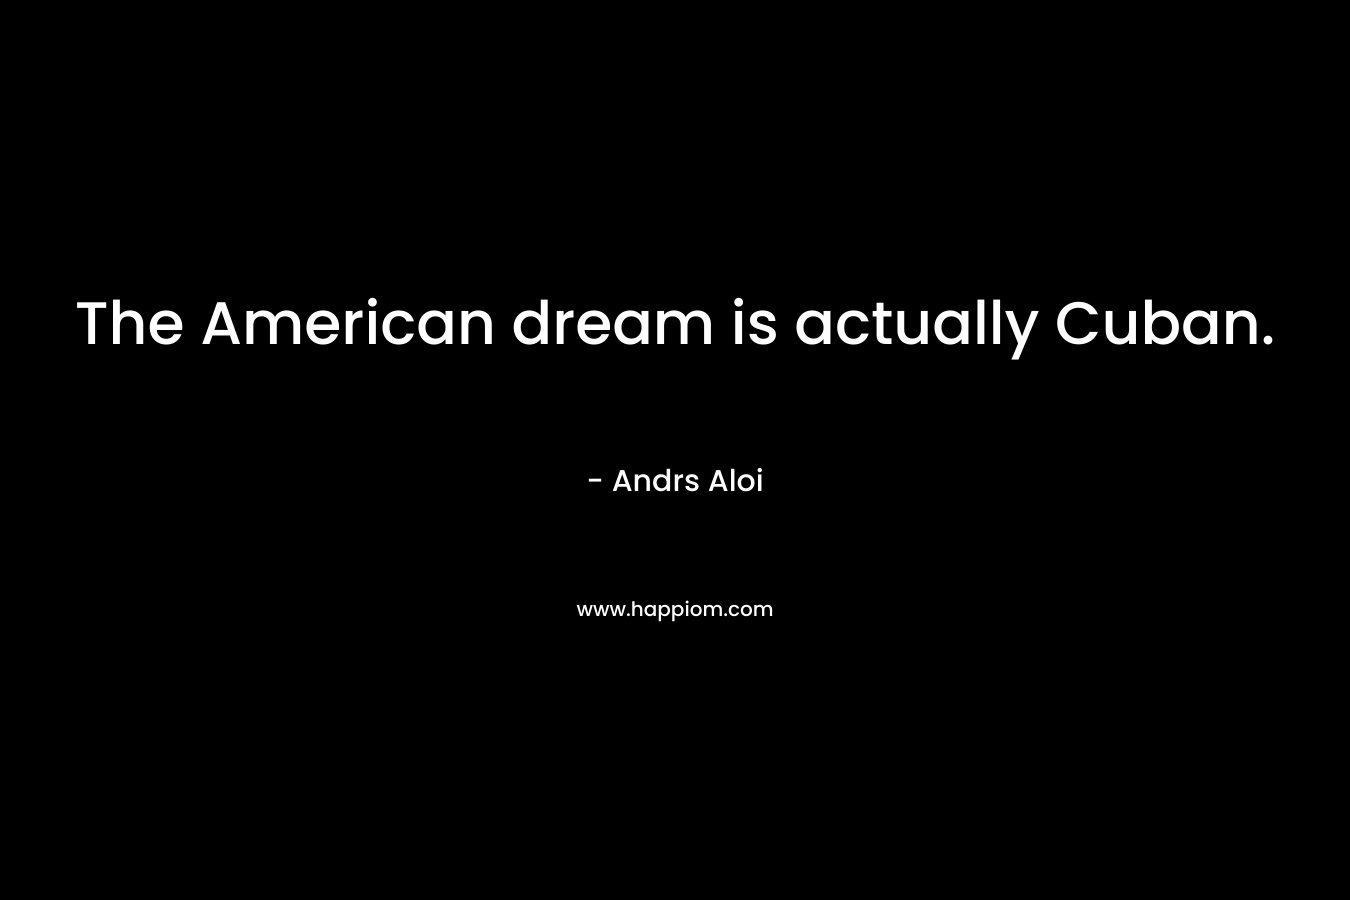 The American dream is actually Cuban.